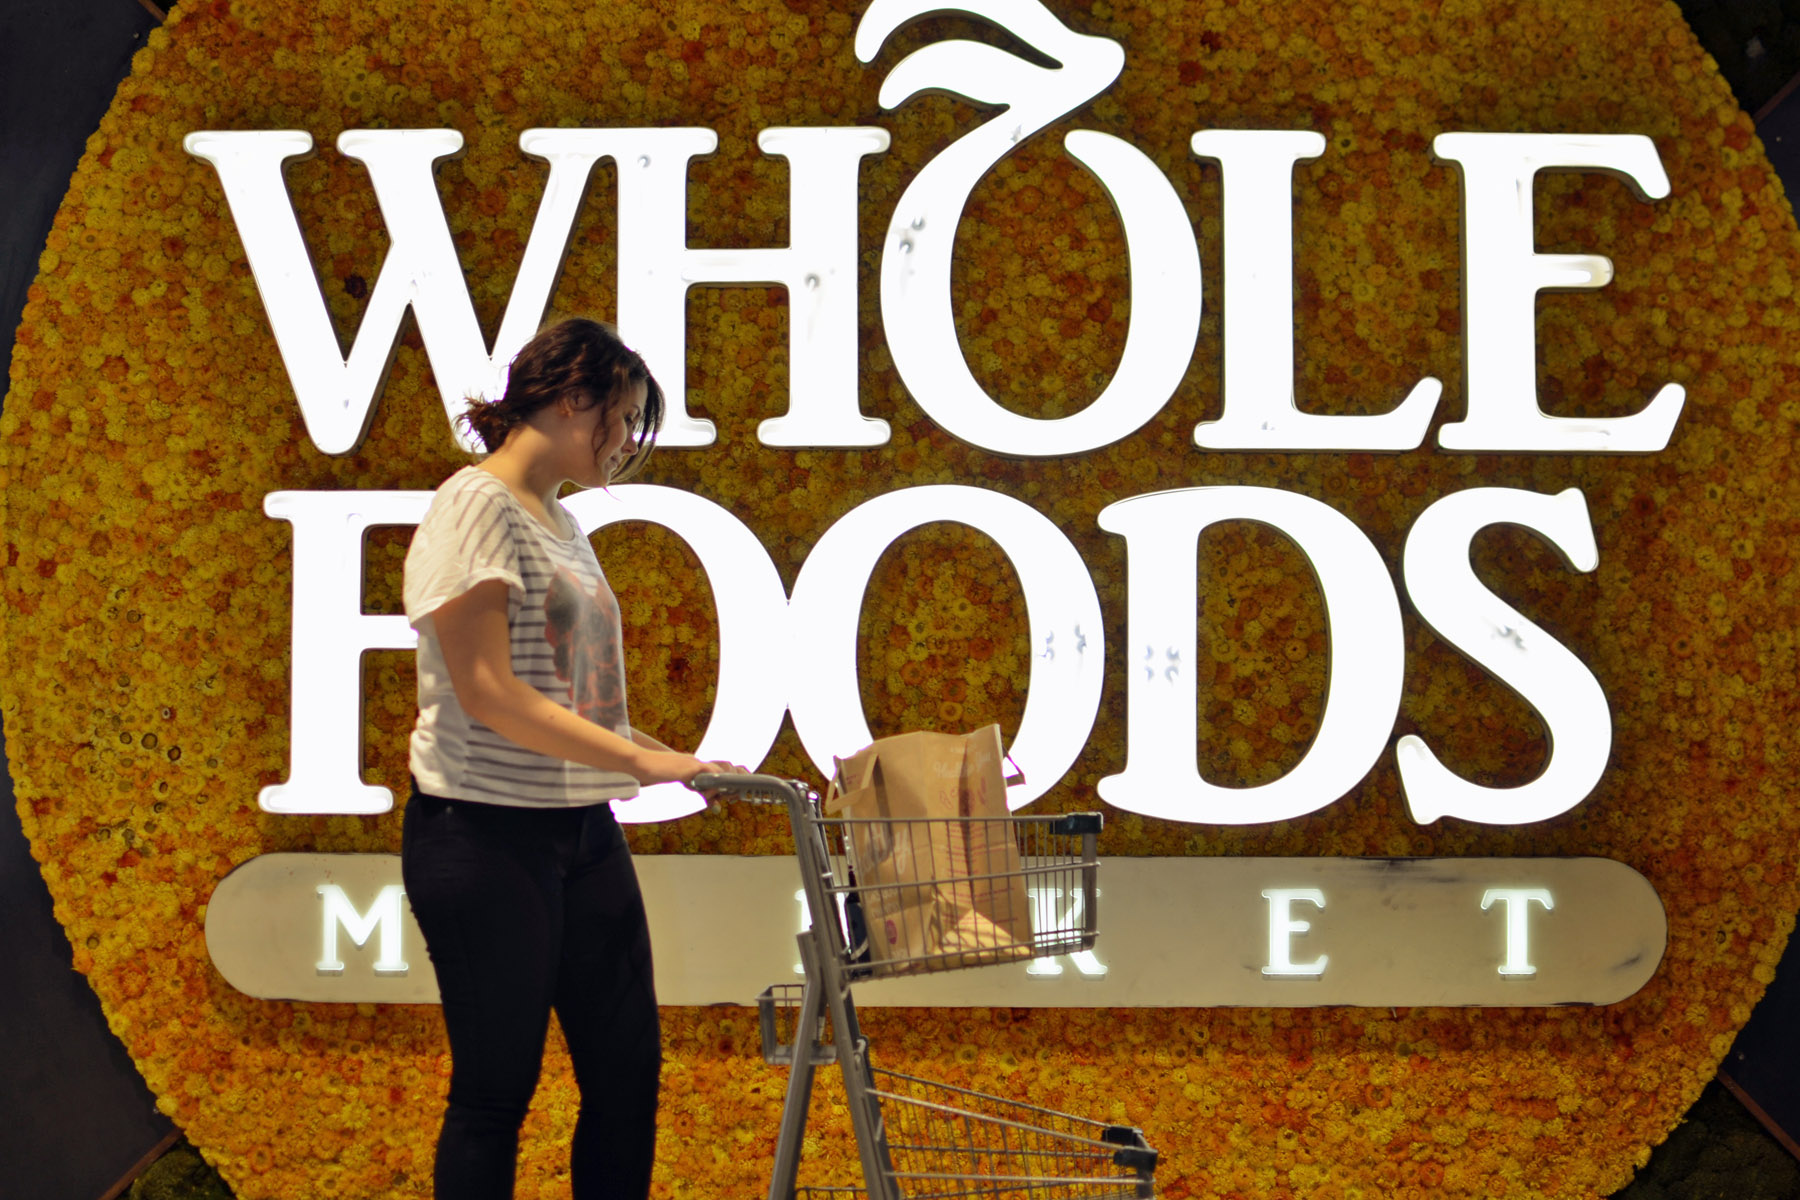 7  Prime Member Benefits You Can Get at Whole Foods